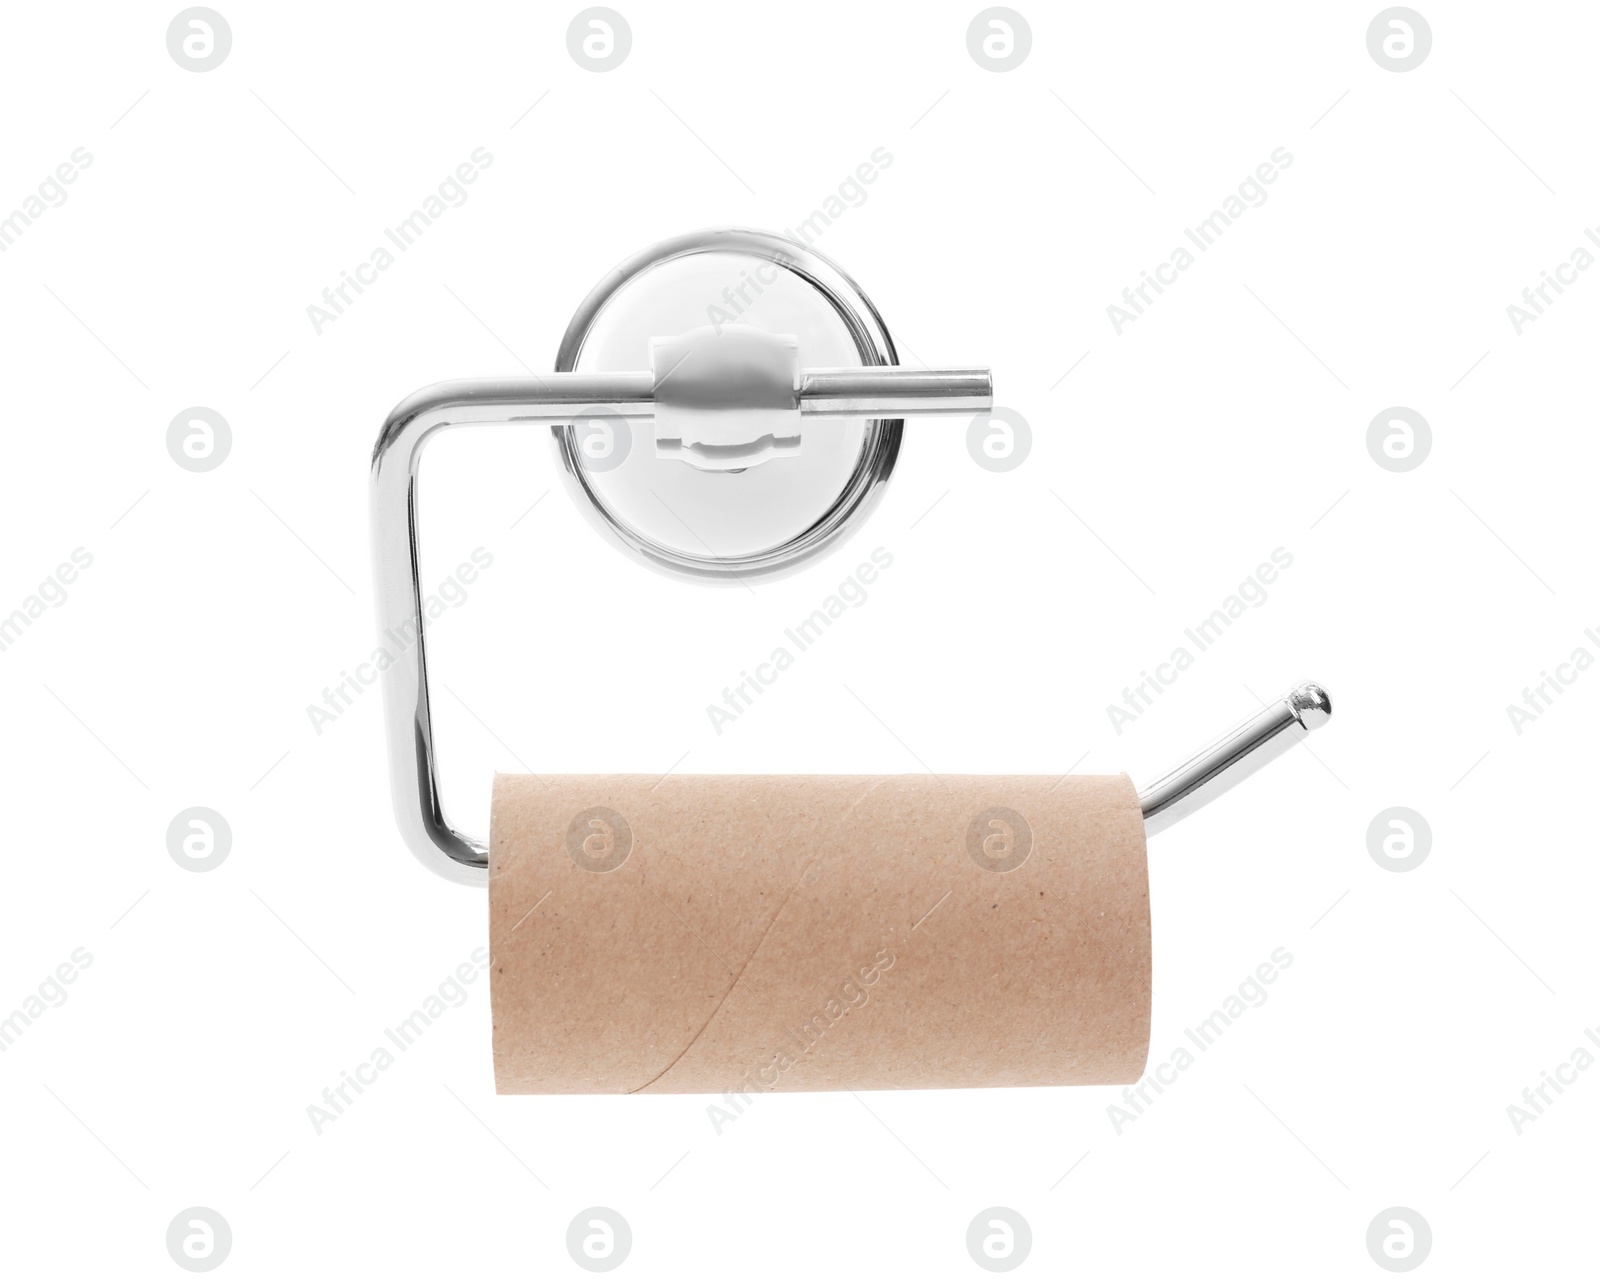 Photo of Holder with empty toilet paper roll on white background